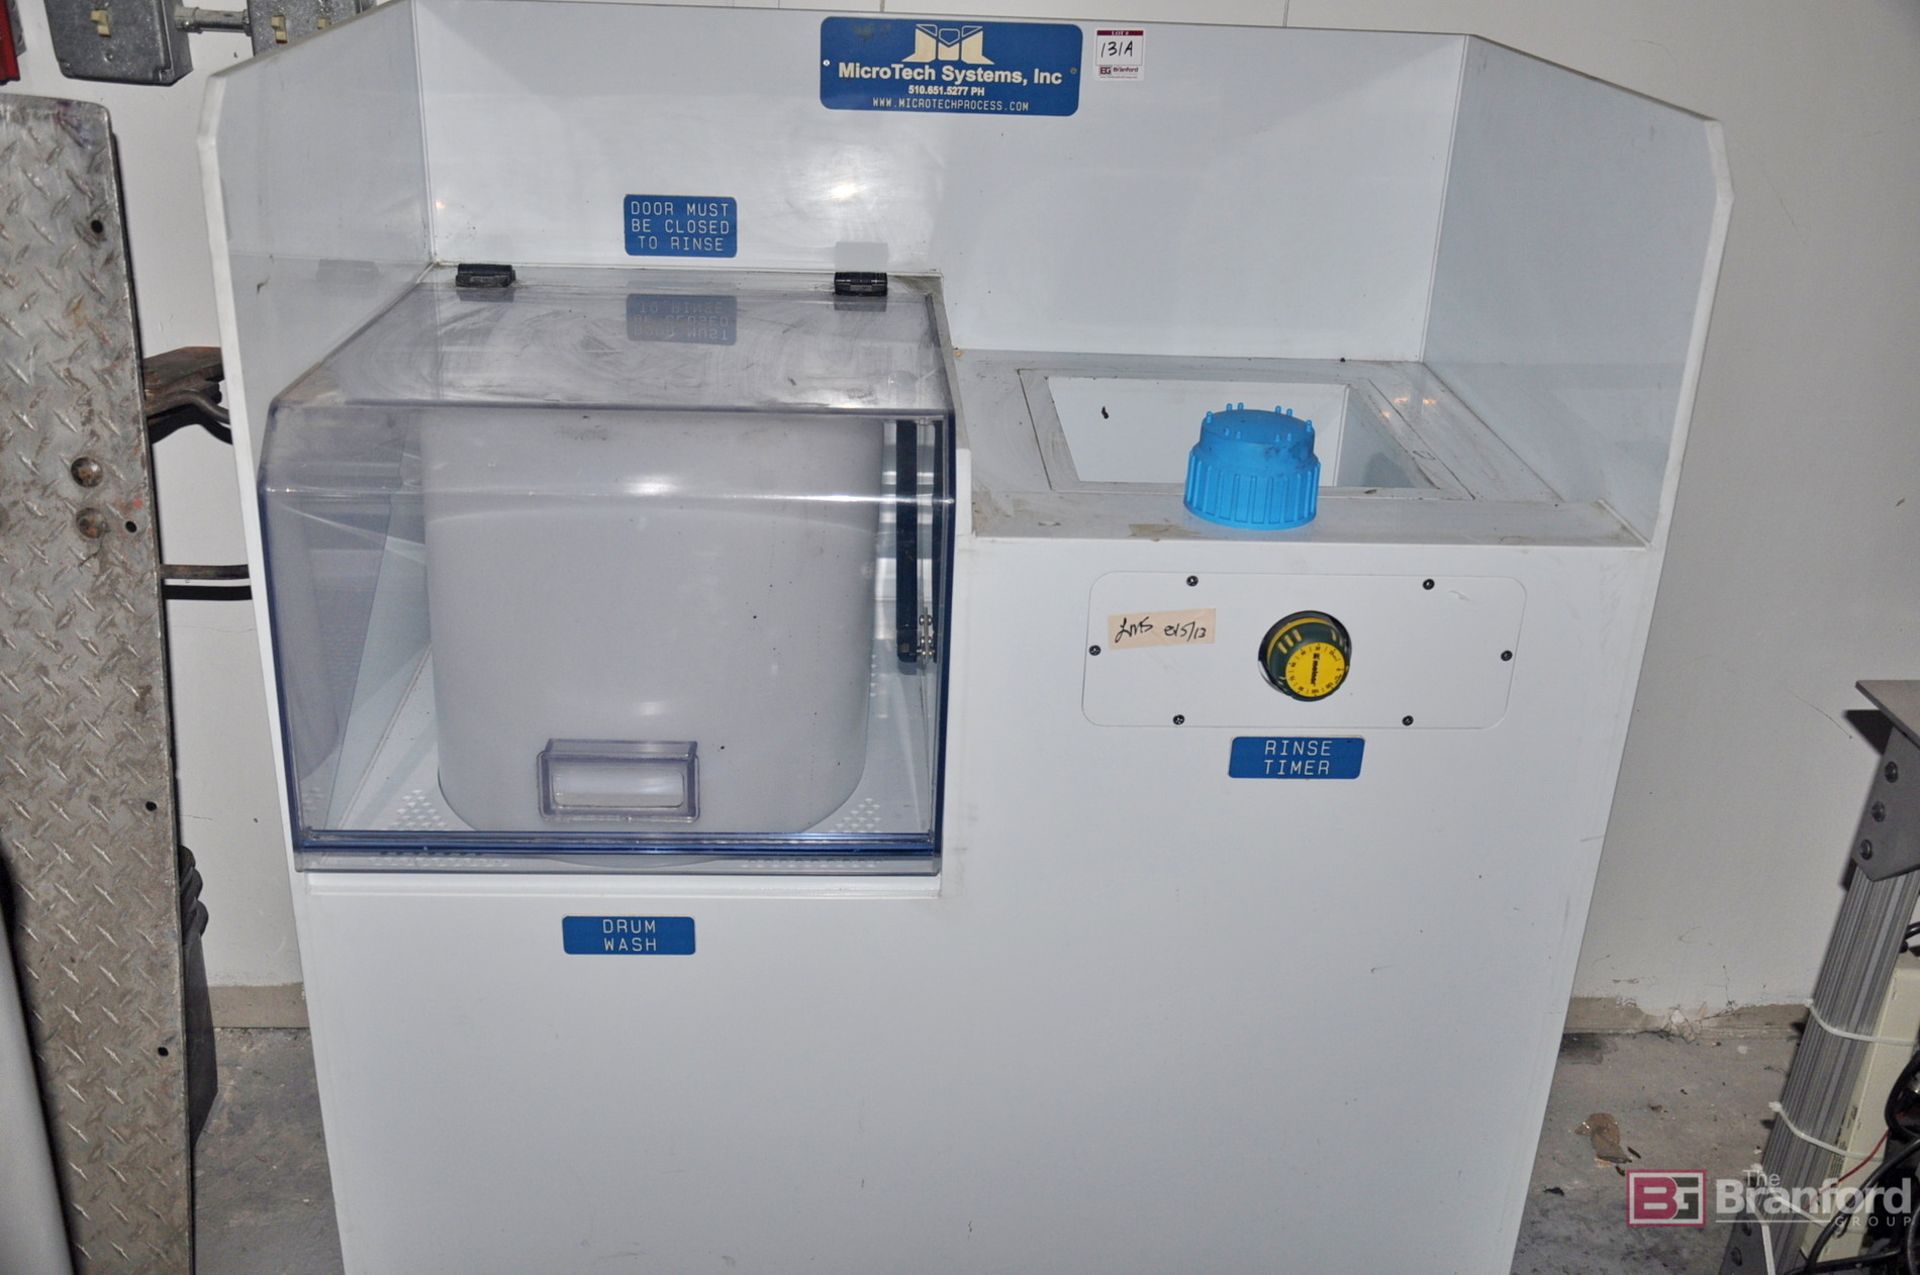 Micro Tech Systems Inc. 50L drum washer - Image 2 of 4